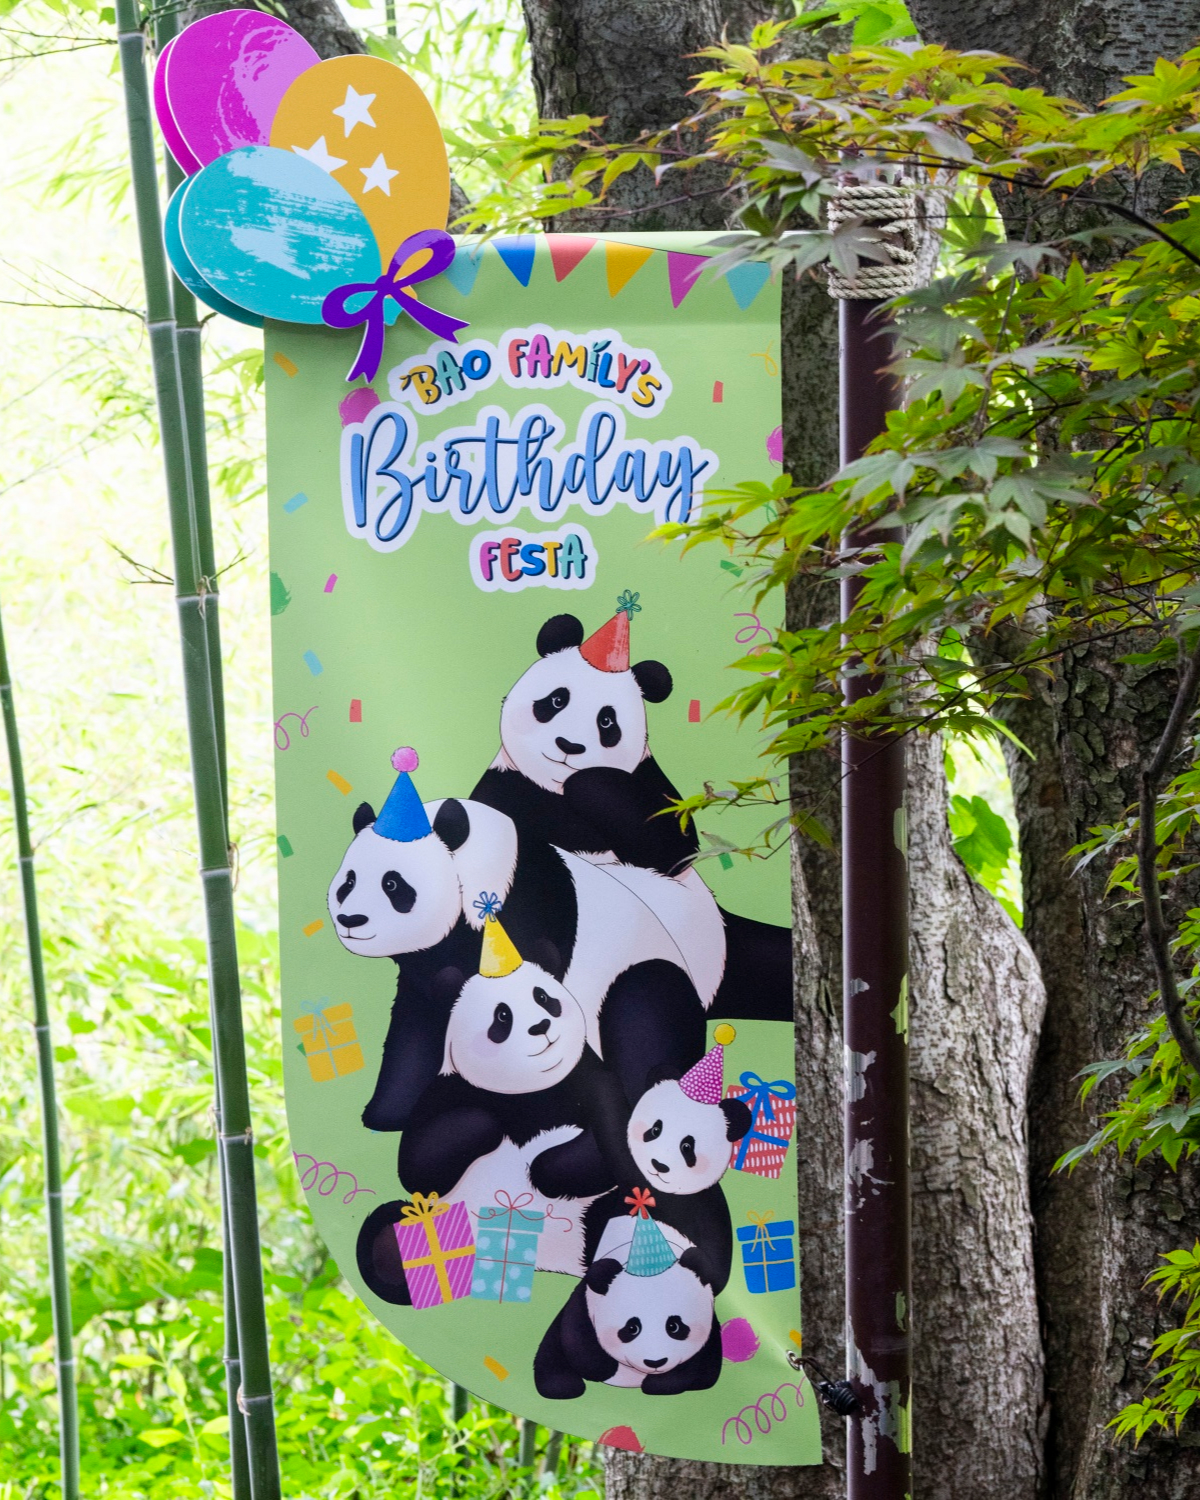 The Bao family are given the royal panda treatment at Everland